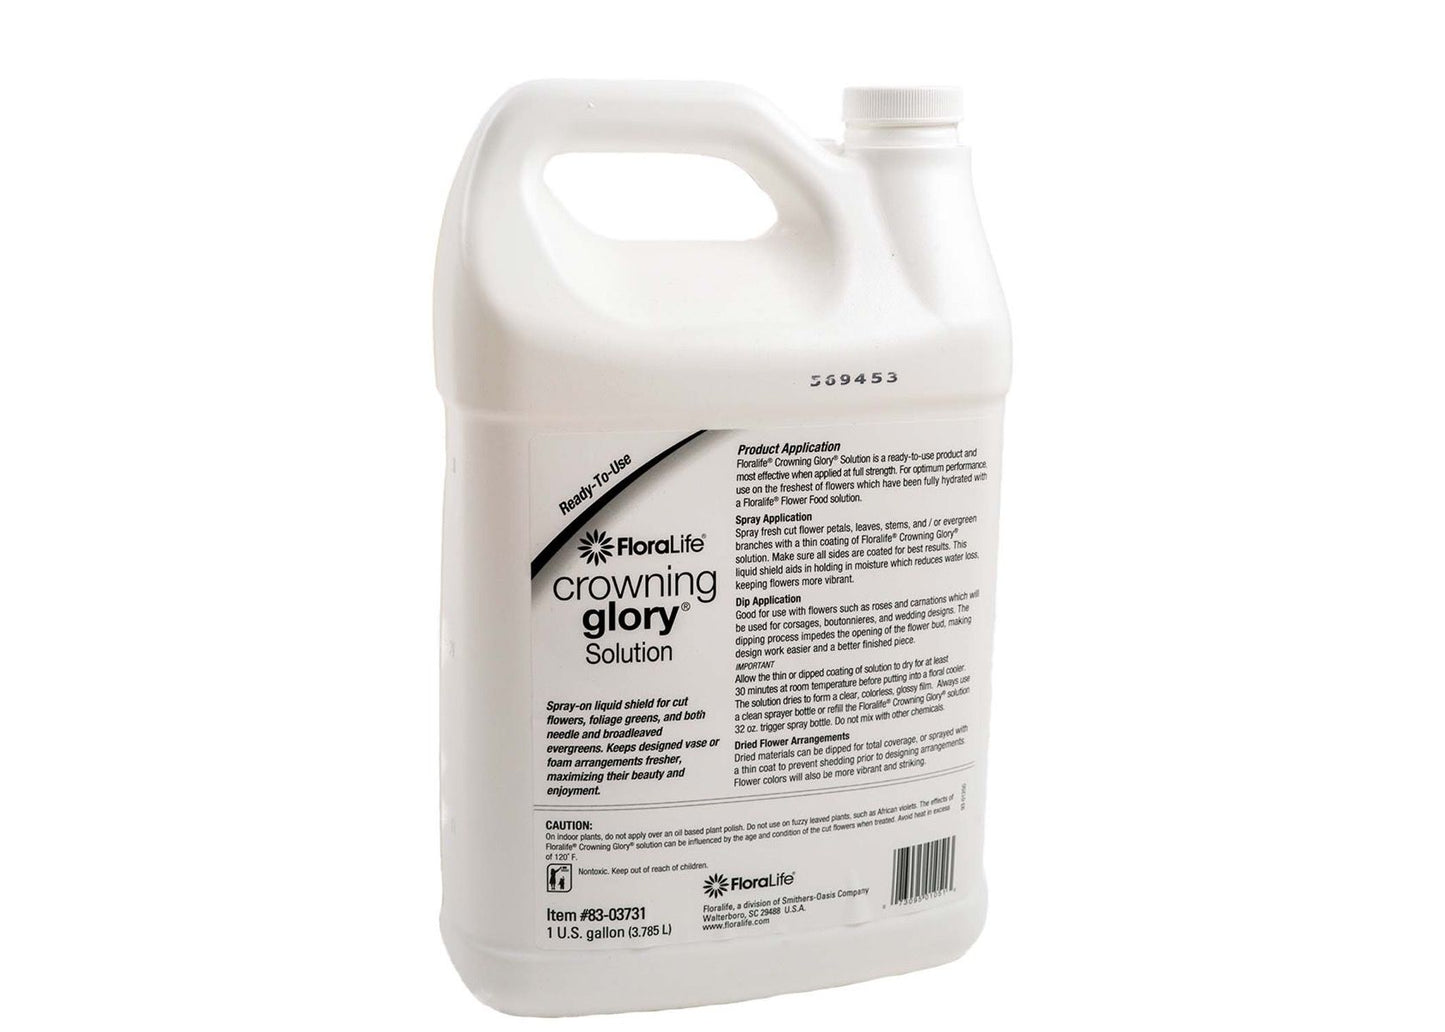 Clear Crowning glory solution - 1 Gallon